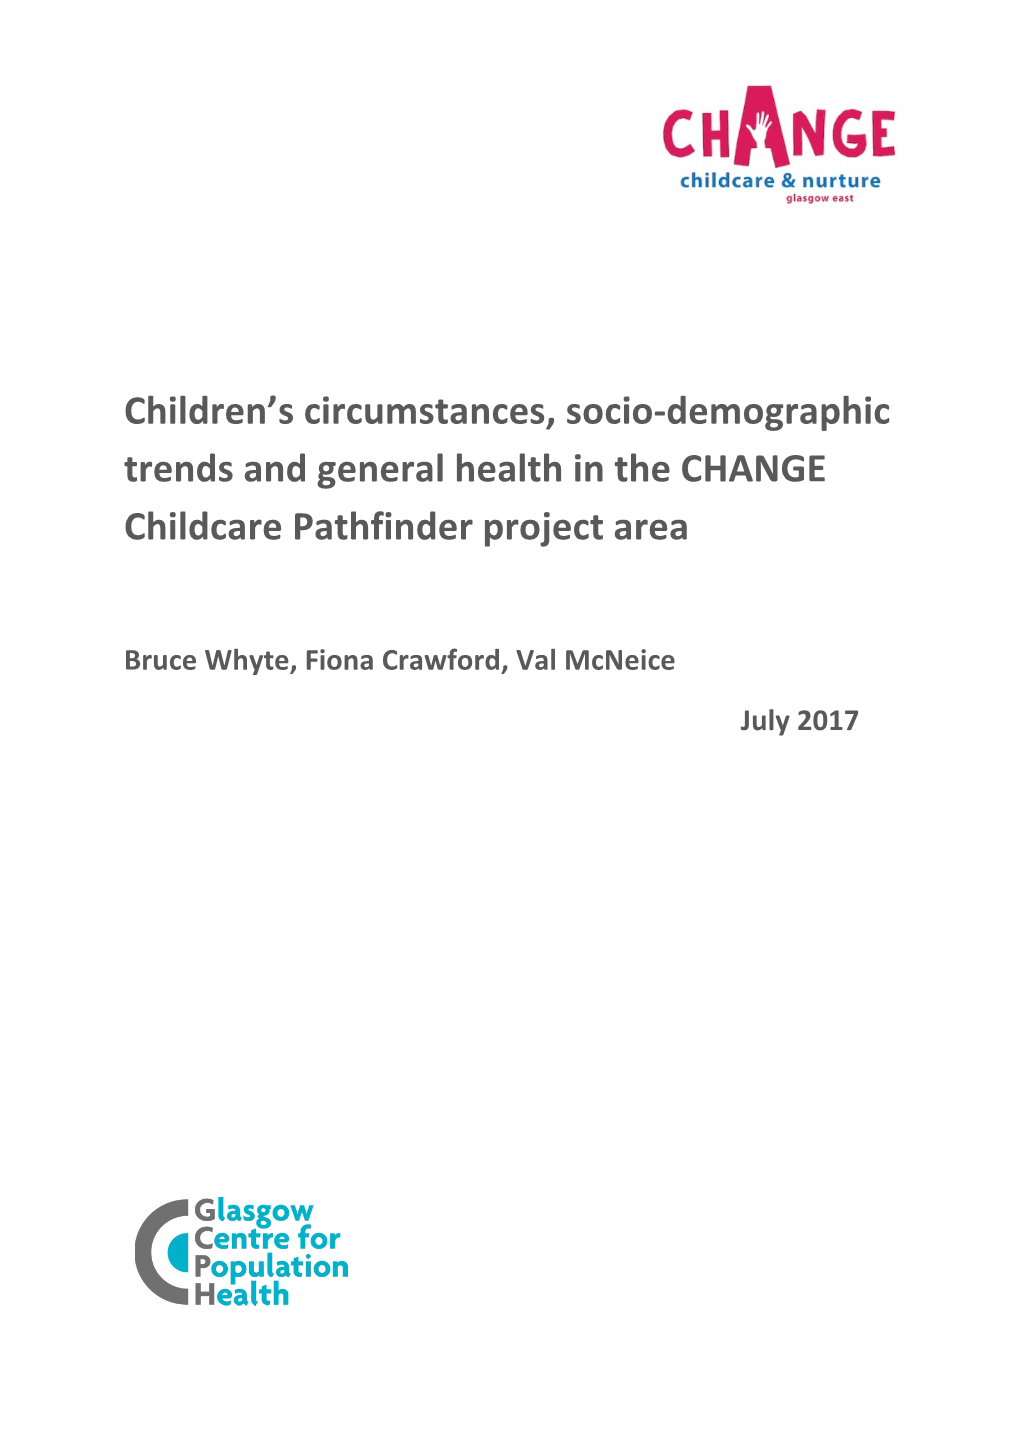 Children's Circumstances, Socio-Demographic Trends and General Health in the CHANGE Childcare Pathfinder Project Area